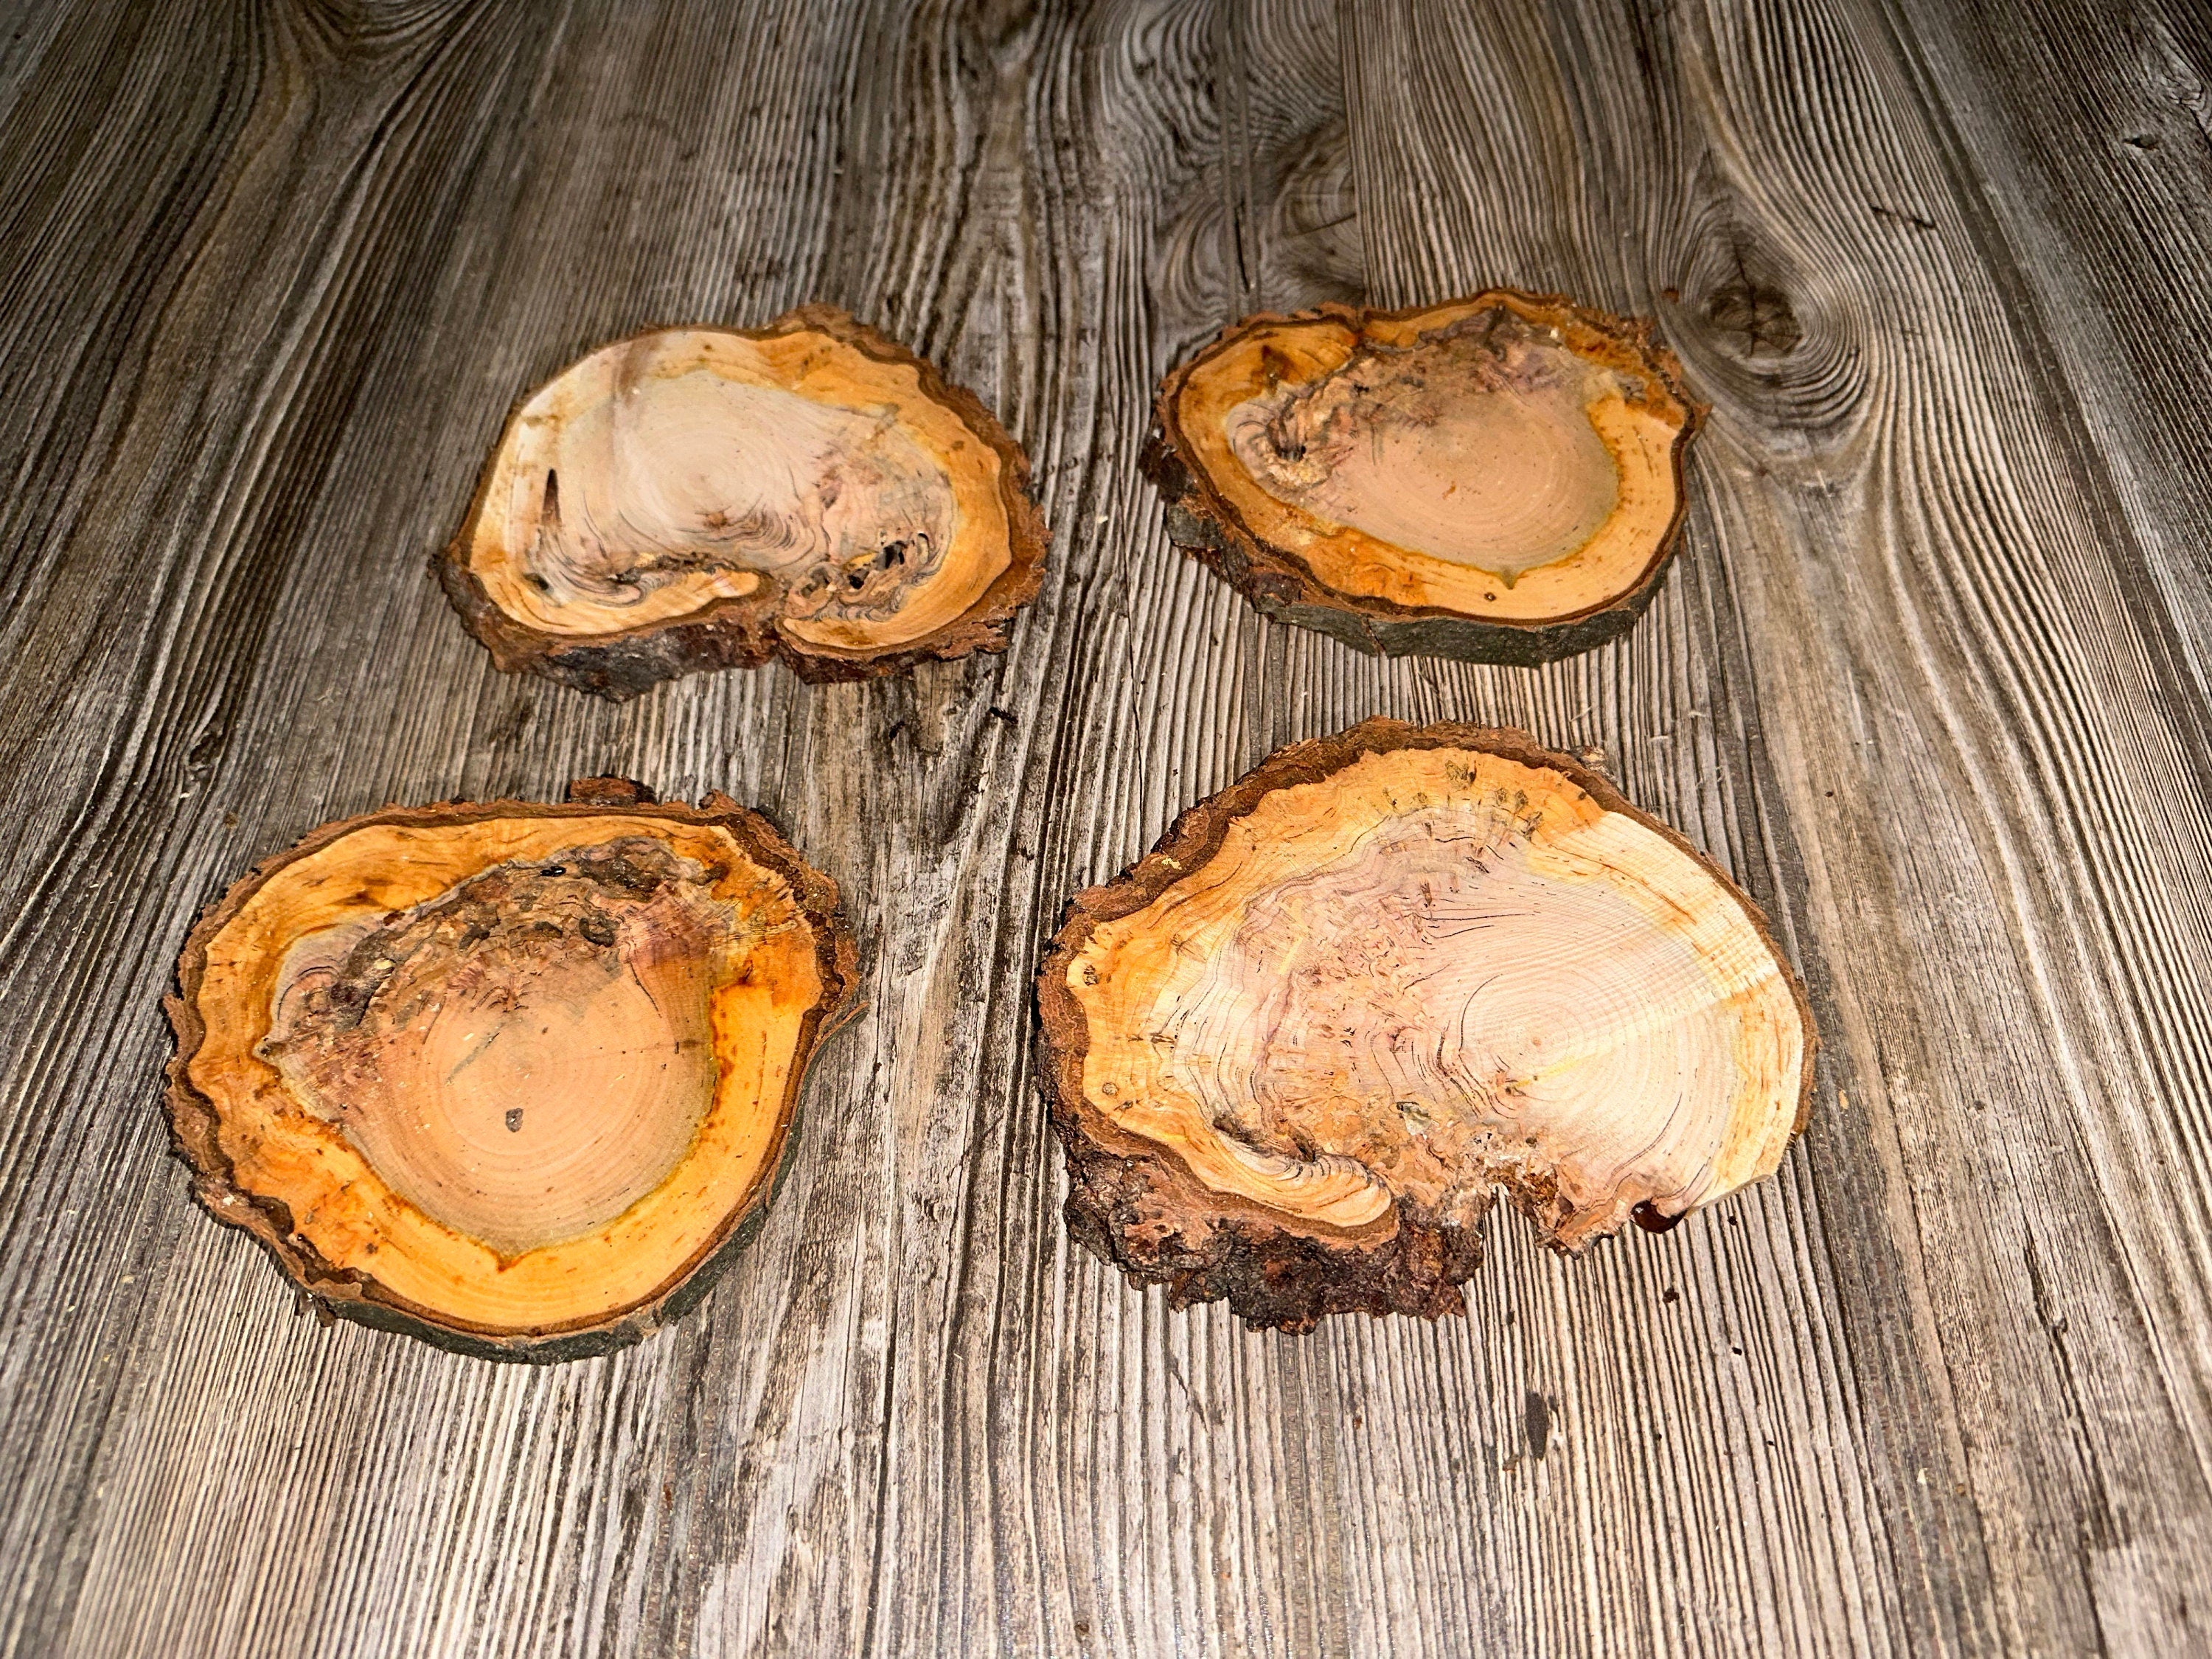 Four Cherry Burl Slices, Approximately 5-5.5 Inches Long by 4-4.5 Inches Wide and 1/2 Inch Thick